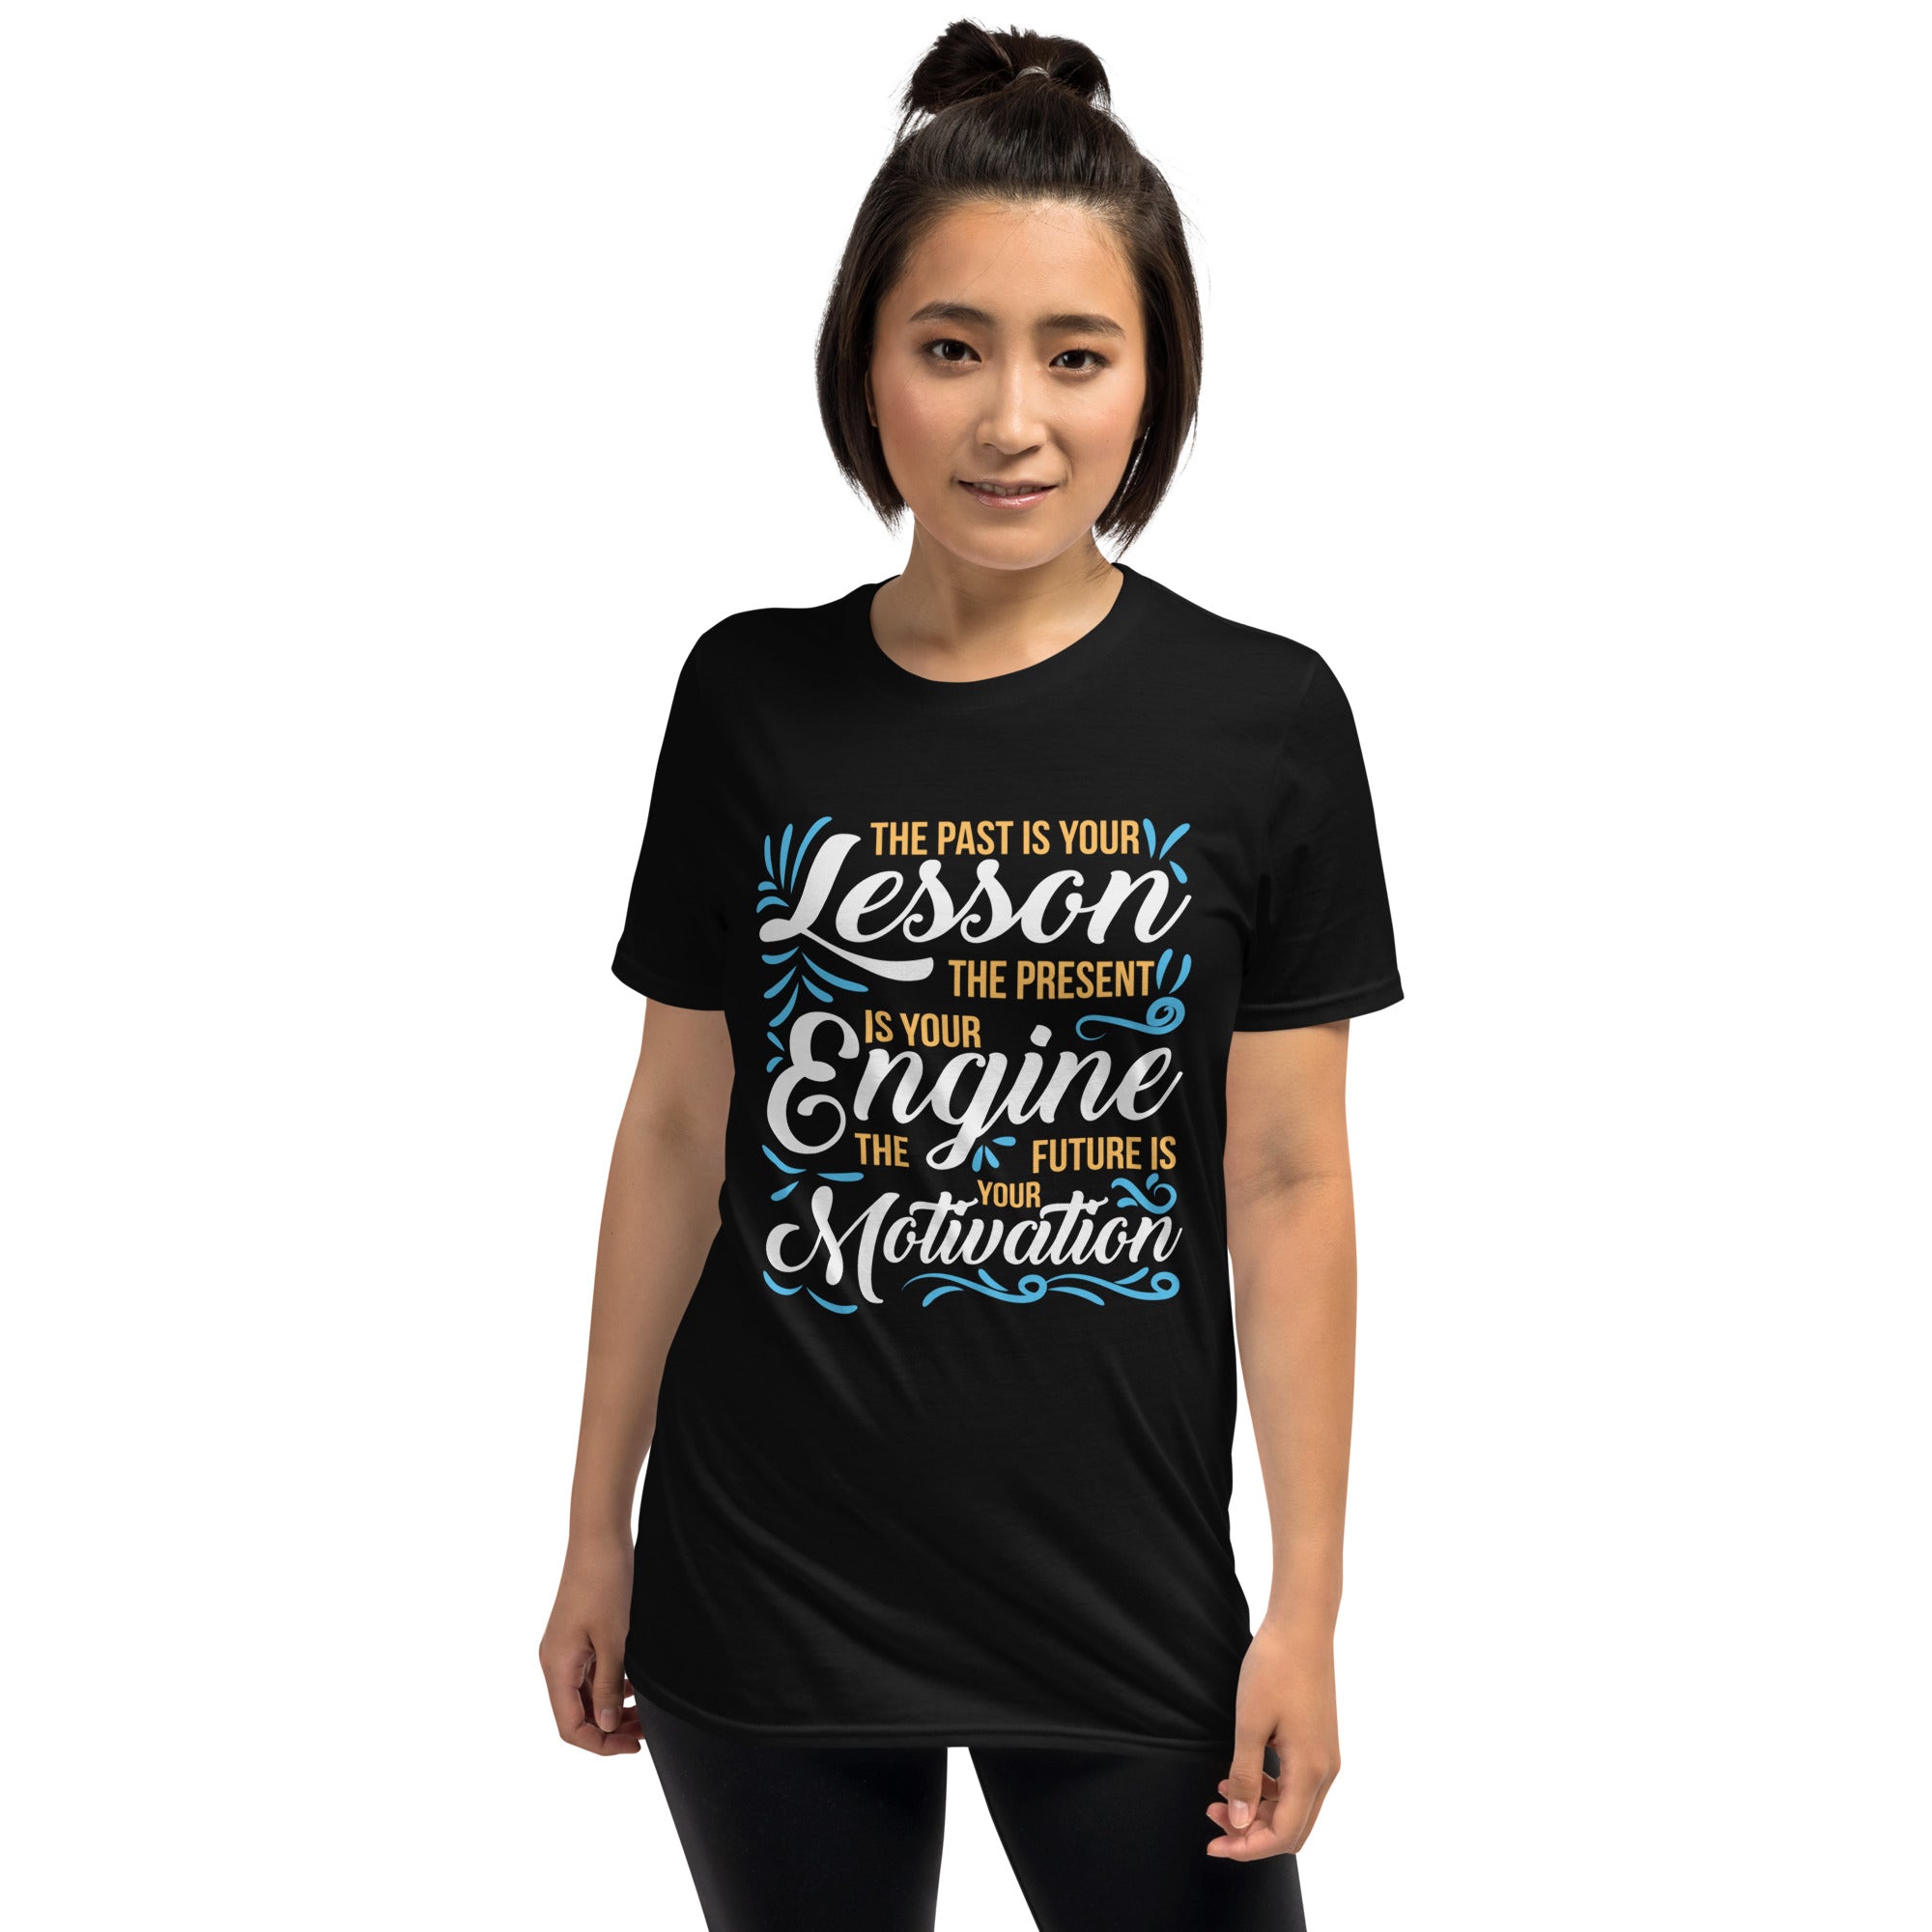 The Past Is Your - Short-Sleeve Unisex T-Shirt